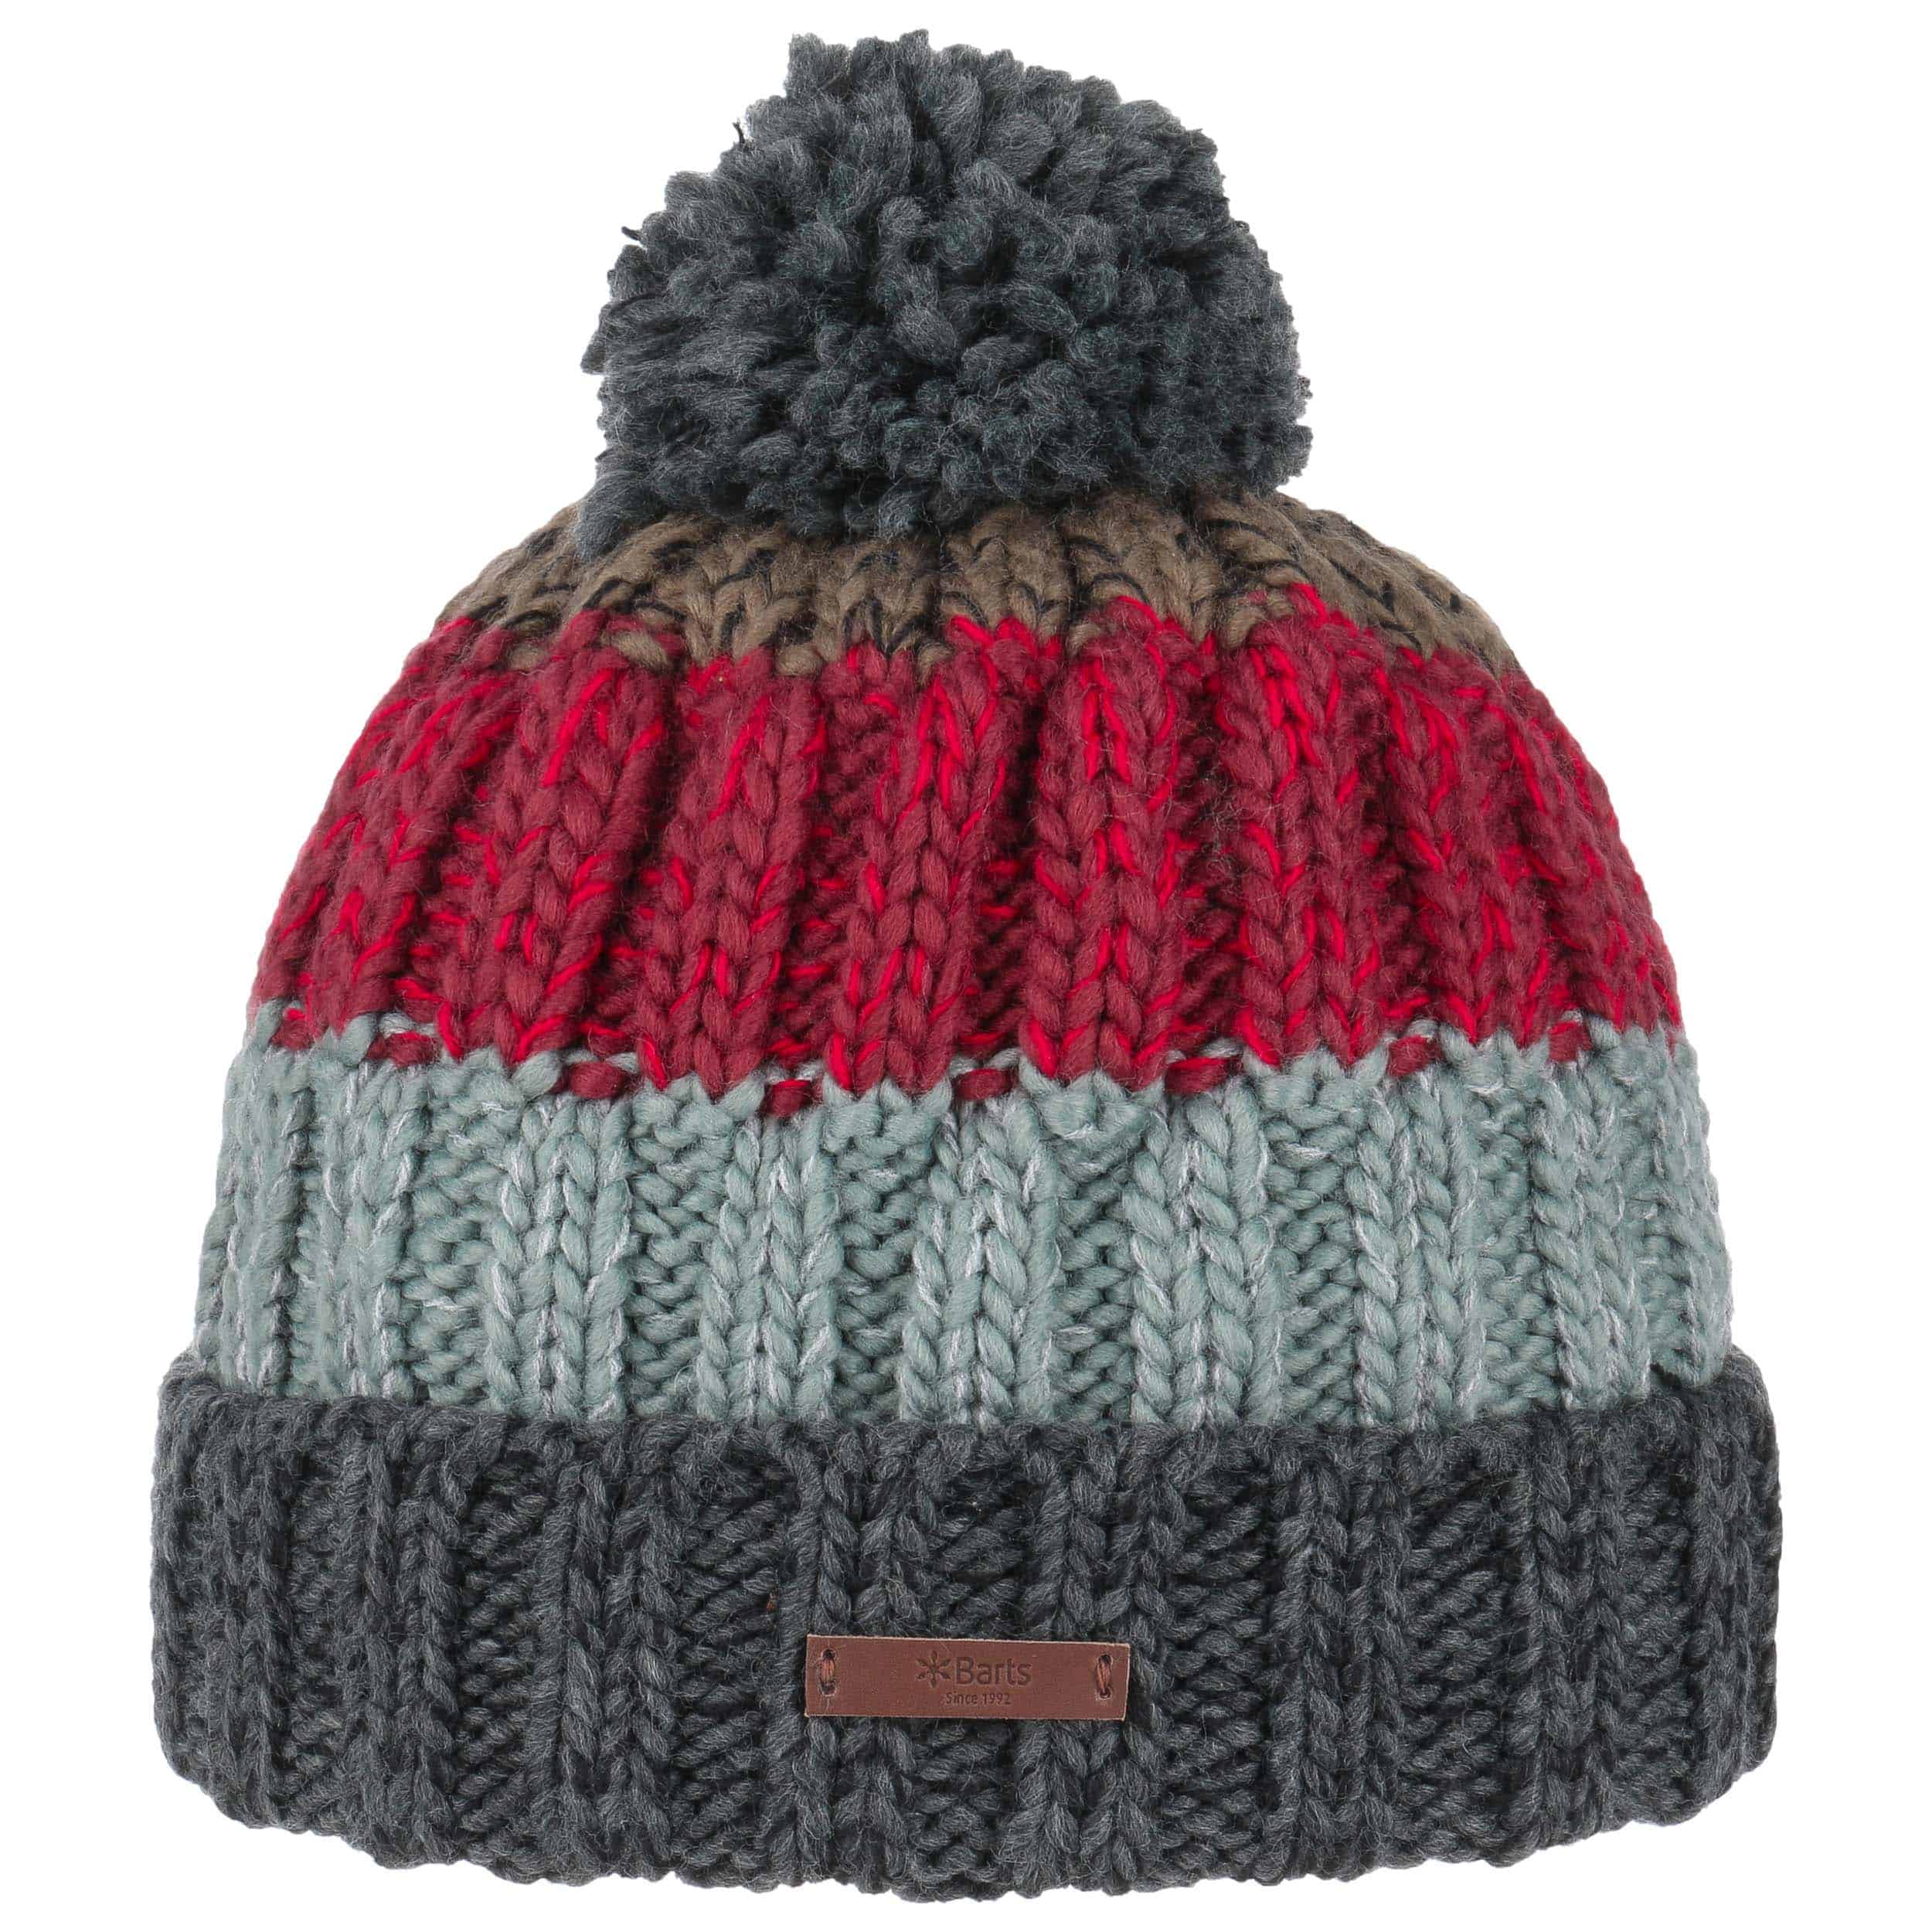 Barts Barts Beanie Knitted Cap Red Moro Fine Knit Pattern Warm 